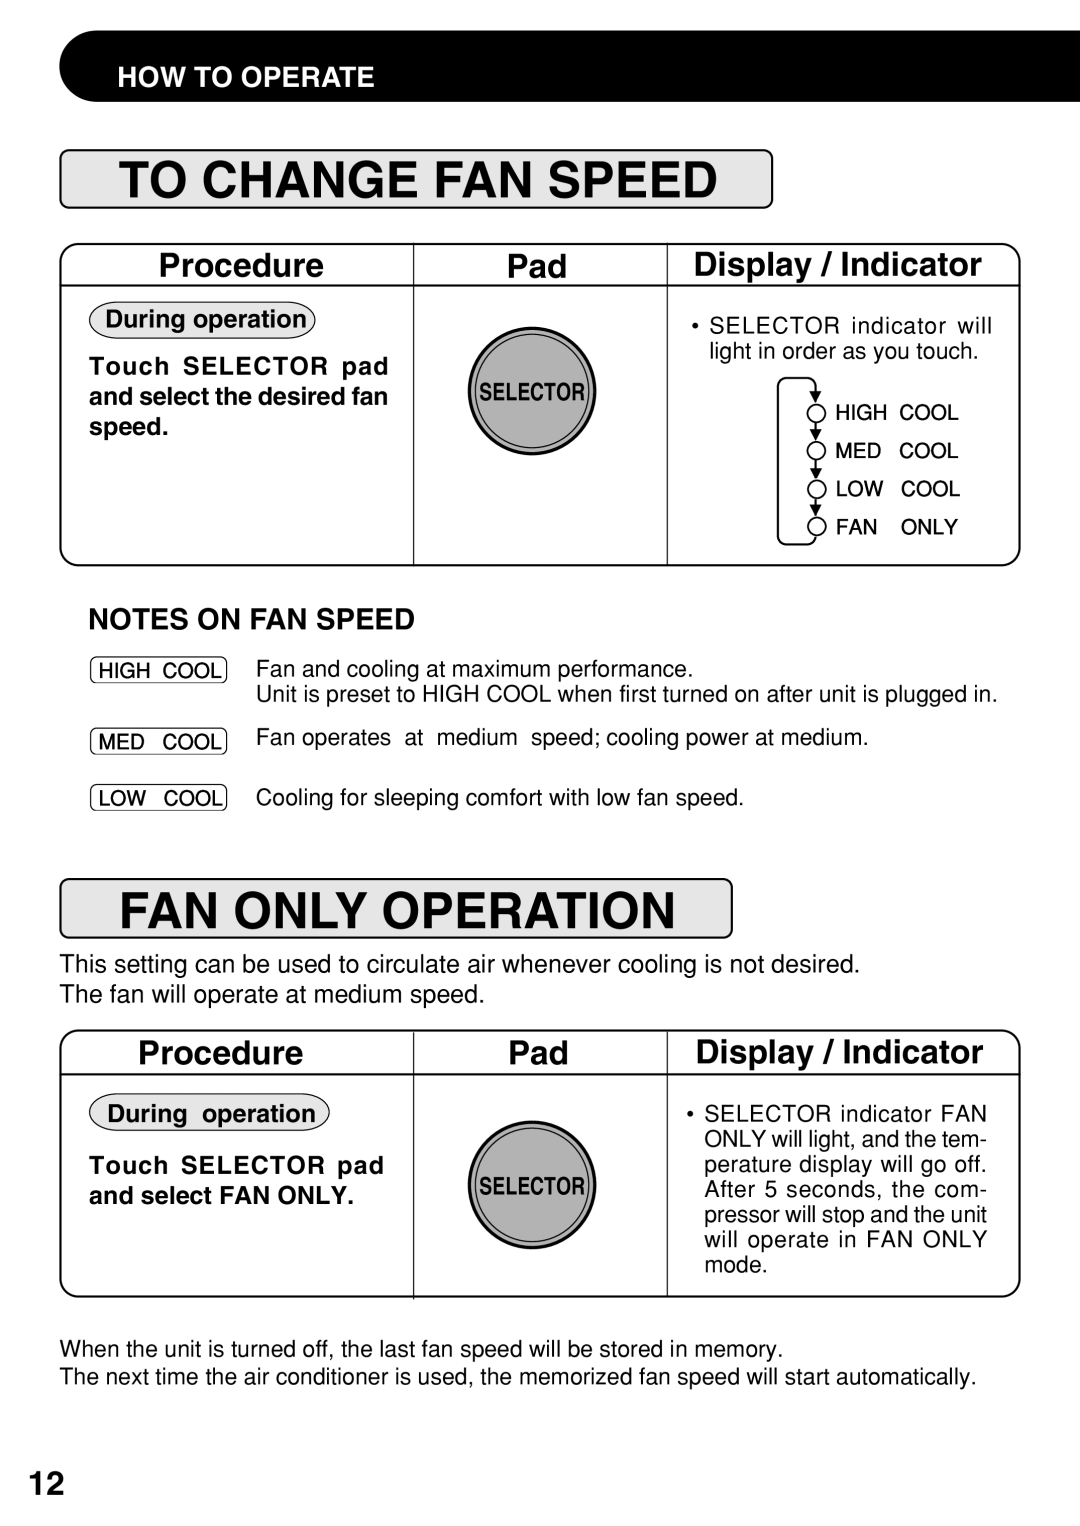 Sharp AF-R100CX To Change Fan Speed, Fan Only Operation, Notes On Fan Speed, How To Operate, During operation, speed 